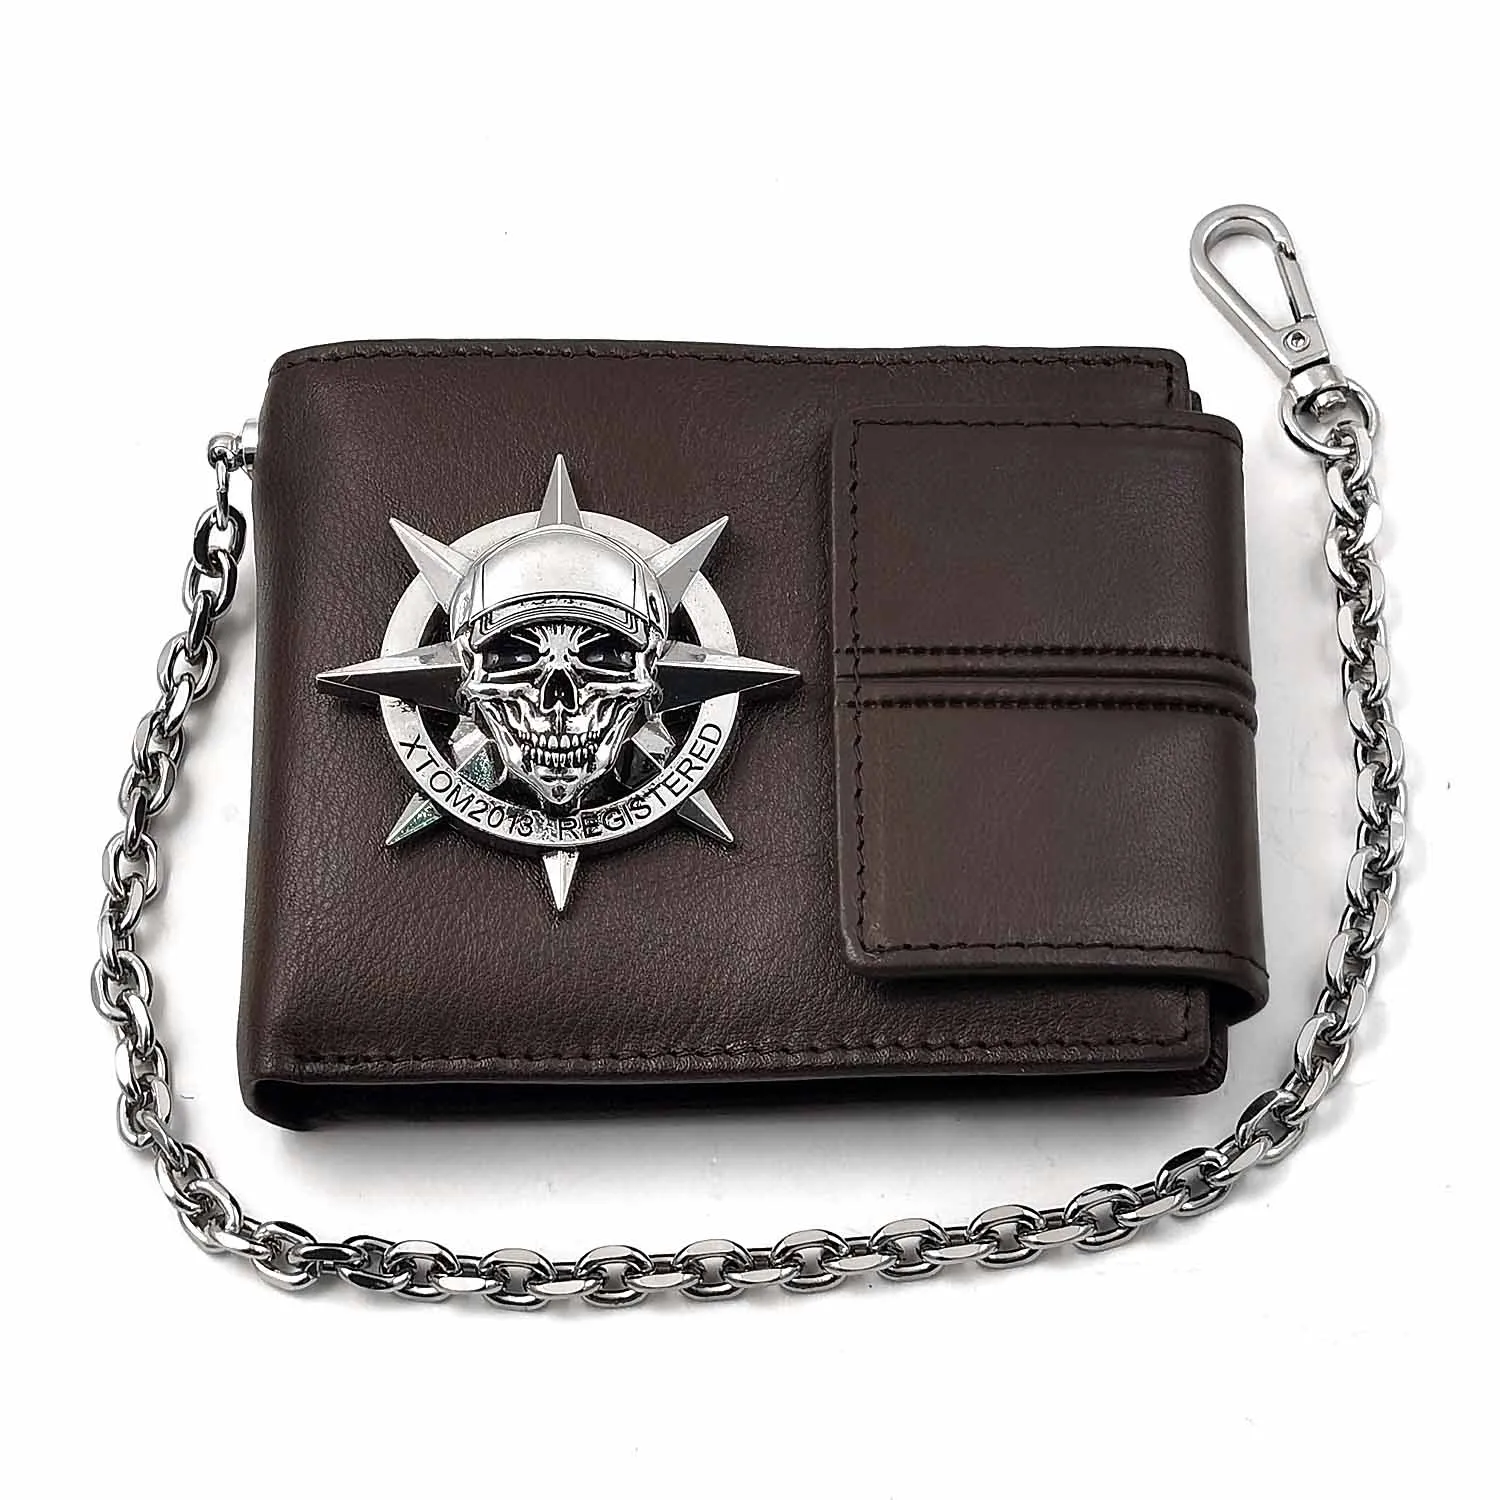 Wallet Men's FASHION HIGHT QUALITY Skull Biker Gothic Chain Purse Leather